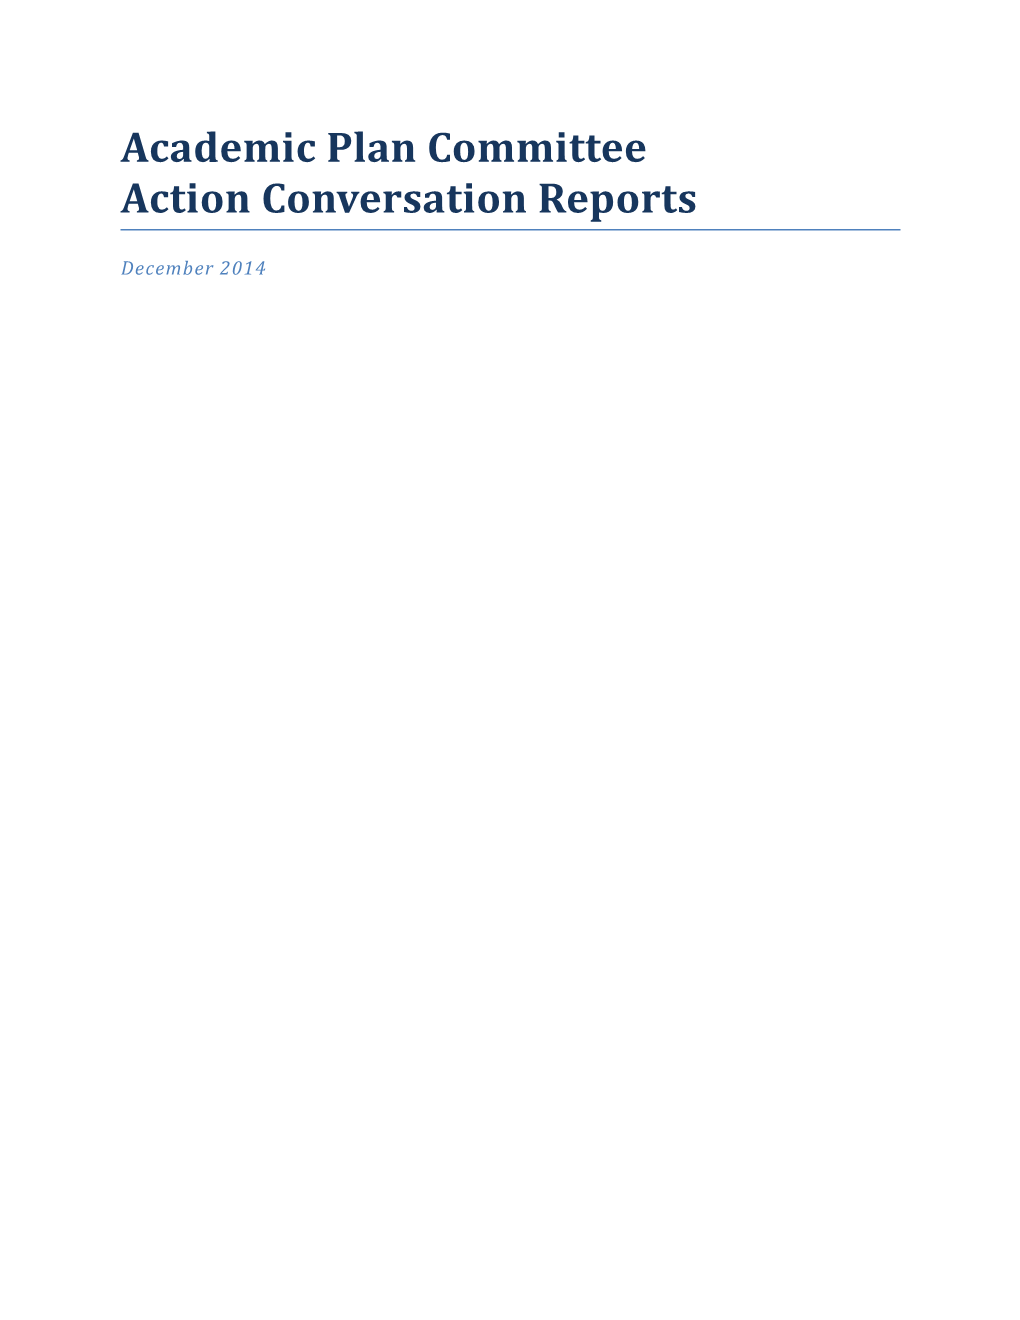 Academic Plan Committee Action Conversation Reports